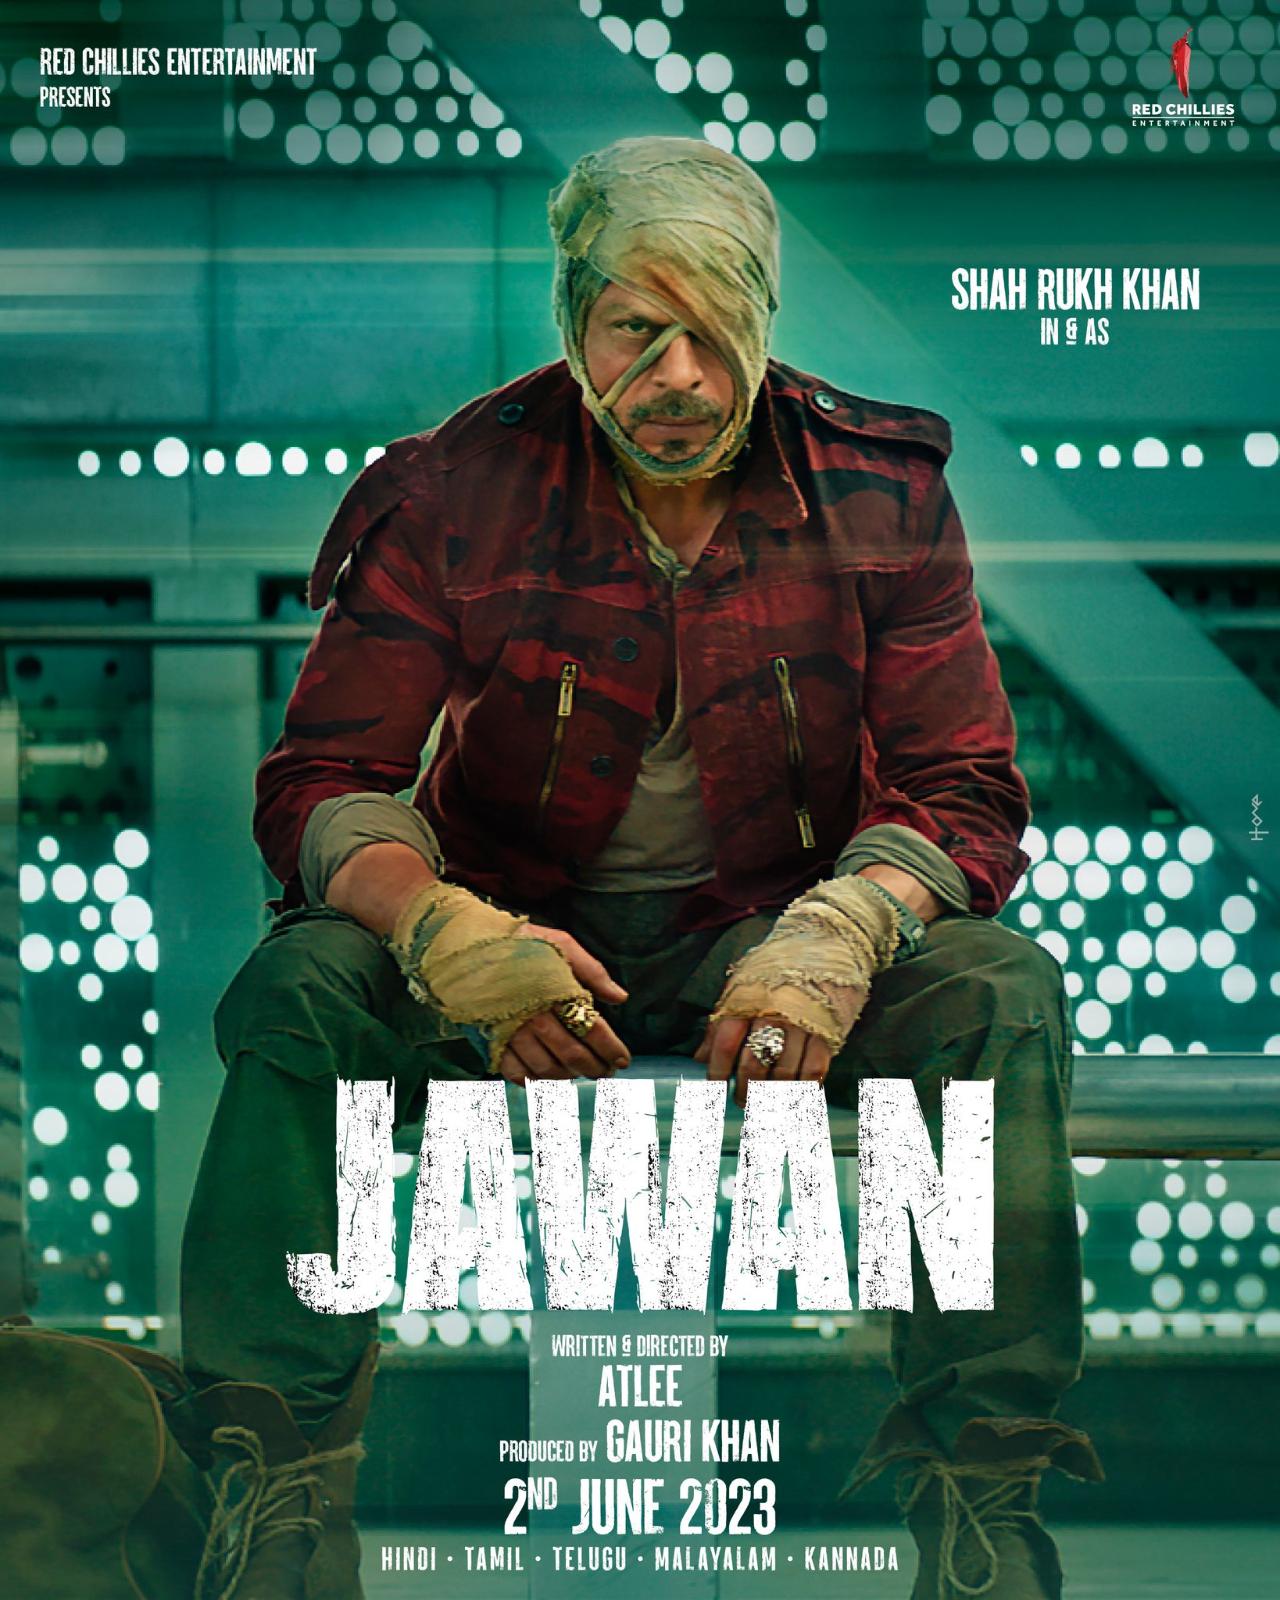 Jawan (September 7, 2023)
SRK's 'Jawan' is an action and suspense film that has been directed by Atlee. This movie features Shah Rukh Khan in double roles alongside Vijay Sethupathi, Nayanthara, Sanya Malhotra, and Priyamani. The film is set to be released on September 7, 2023.